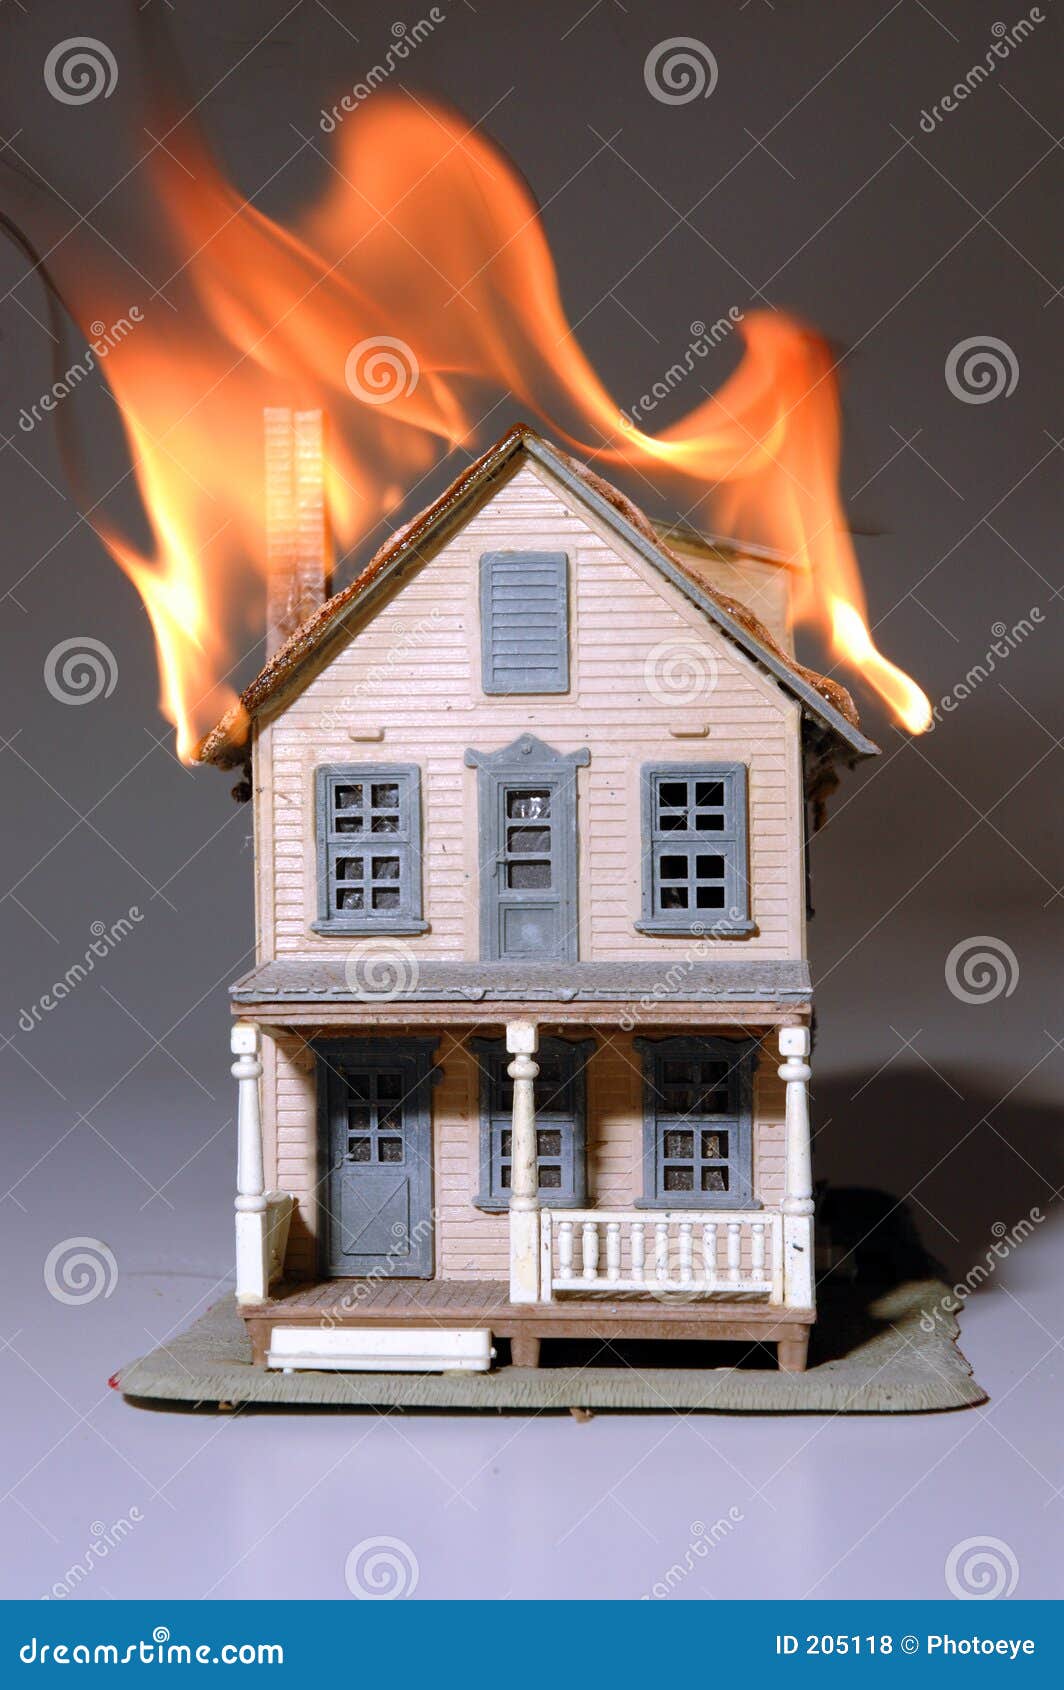 clipart house on fire - photo #17